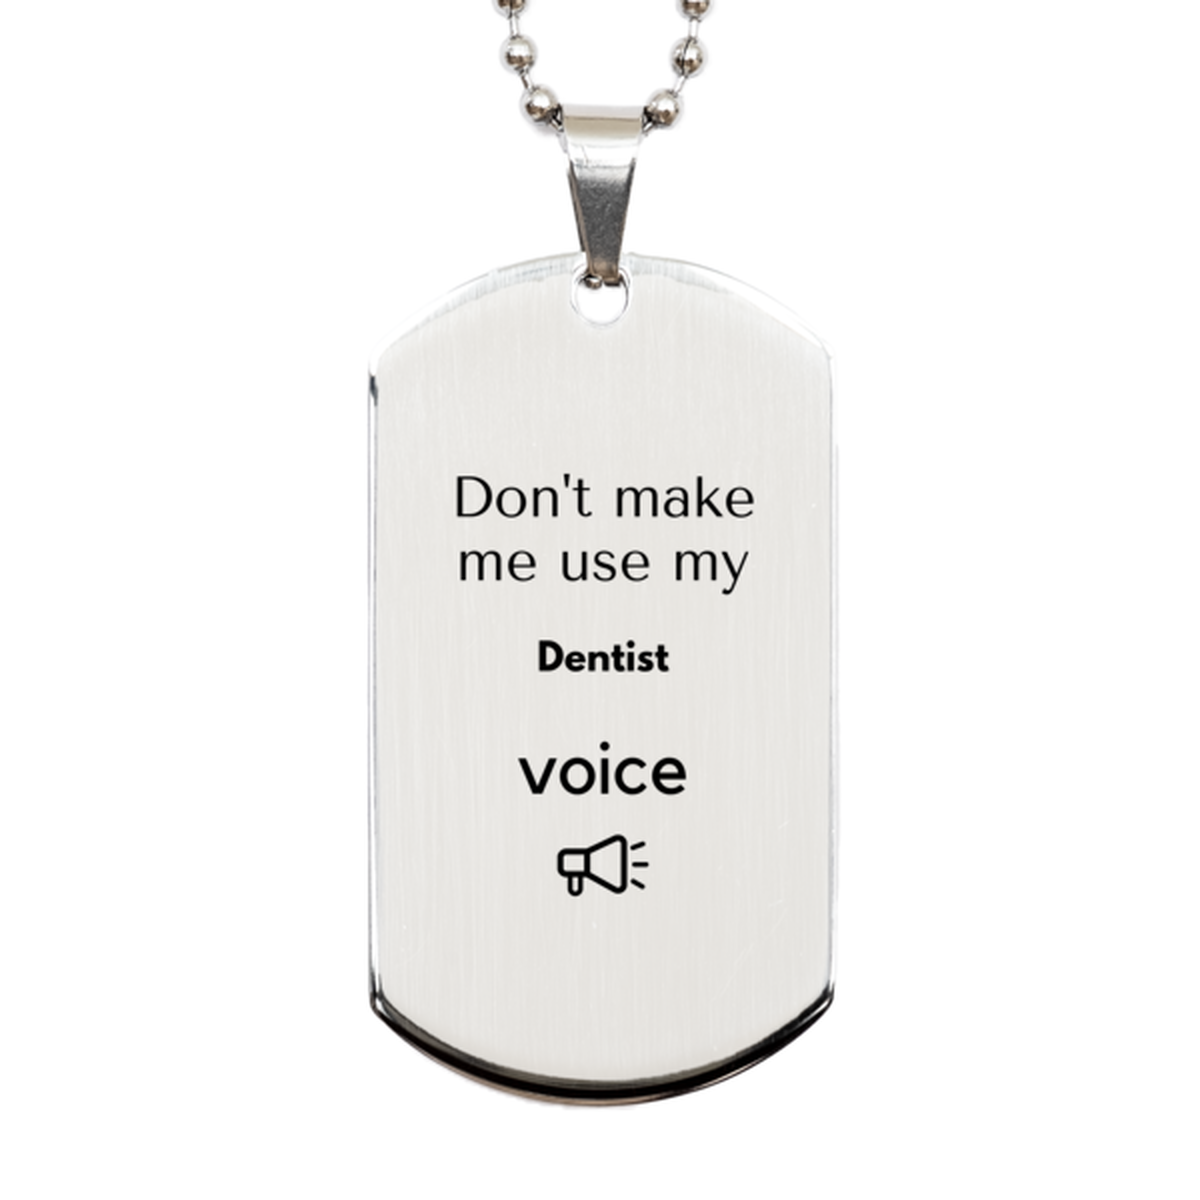 Don't make me use my Dentist voice, Sarcasm Dentist Gifts, Christmas Dentist Silver Dog Tag Birthday Unique Gifts For Dentist Coworkers, Men, Women, Colleague, Friends